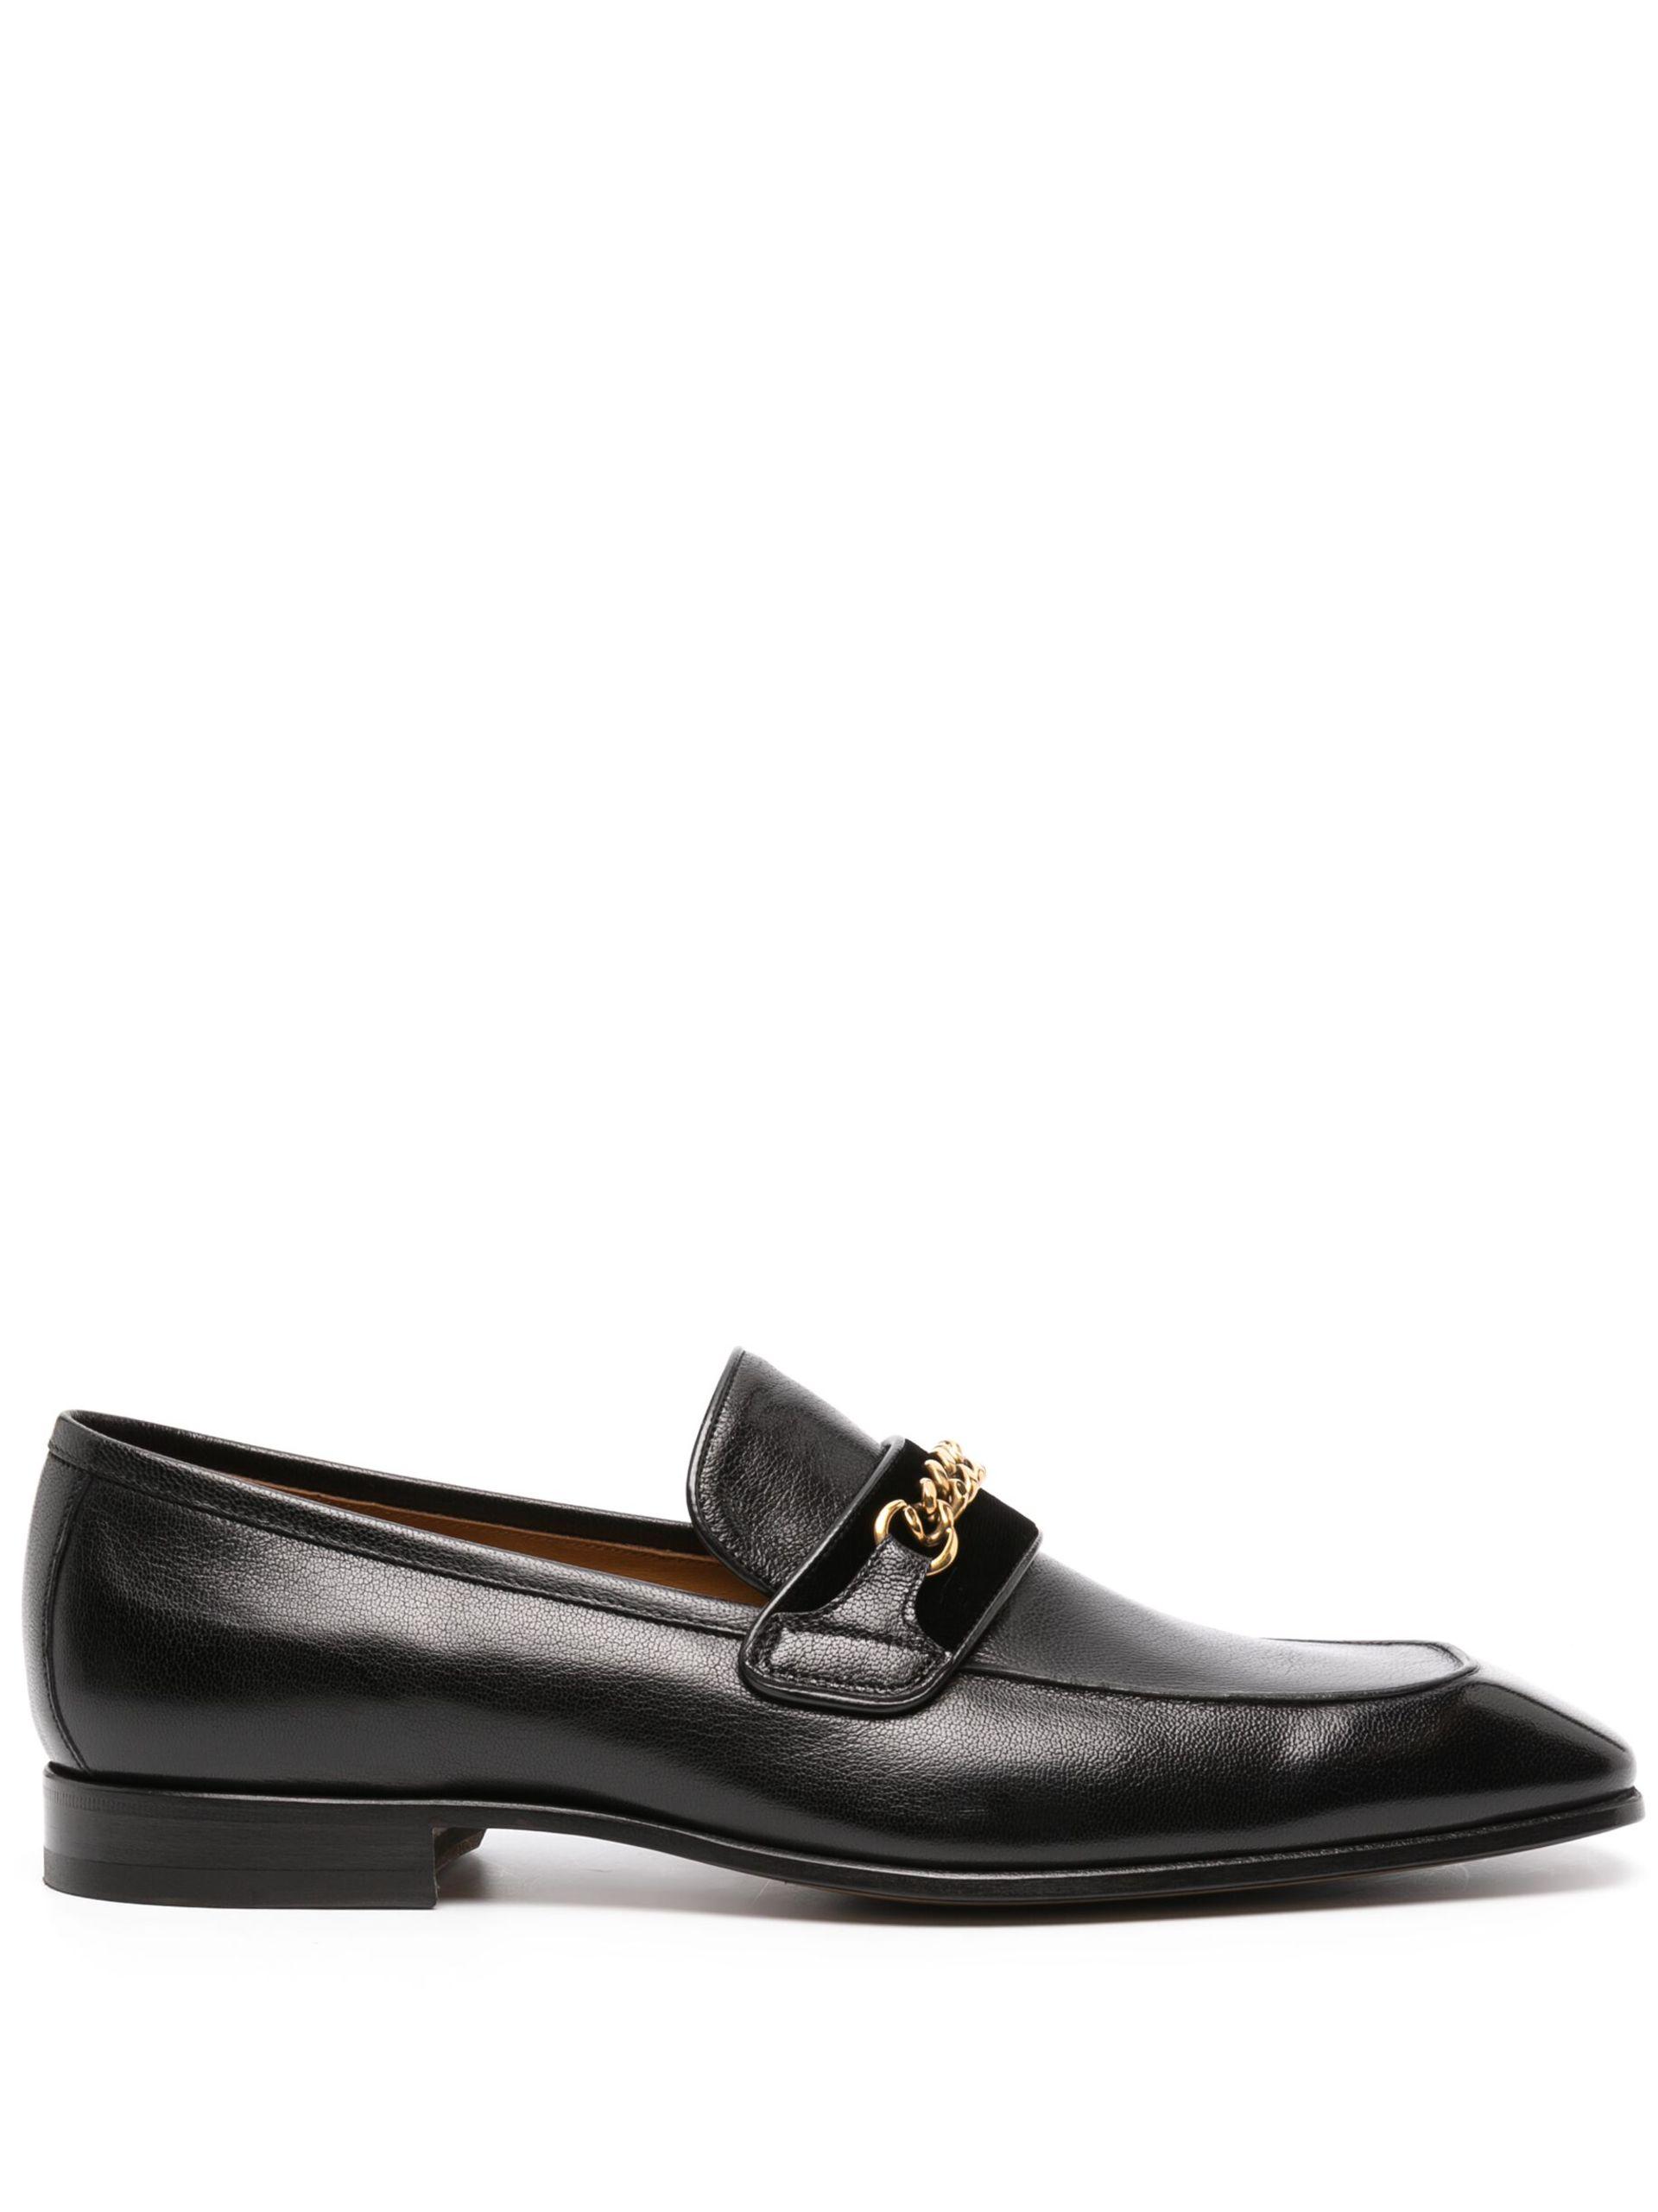 Tom Ford Baily Square-toe Leather Loafers in Black for Men | Lyst